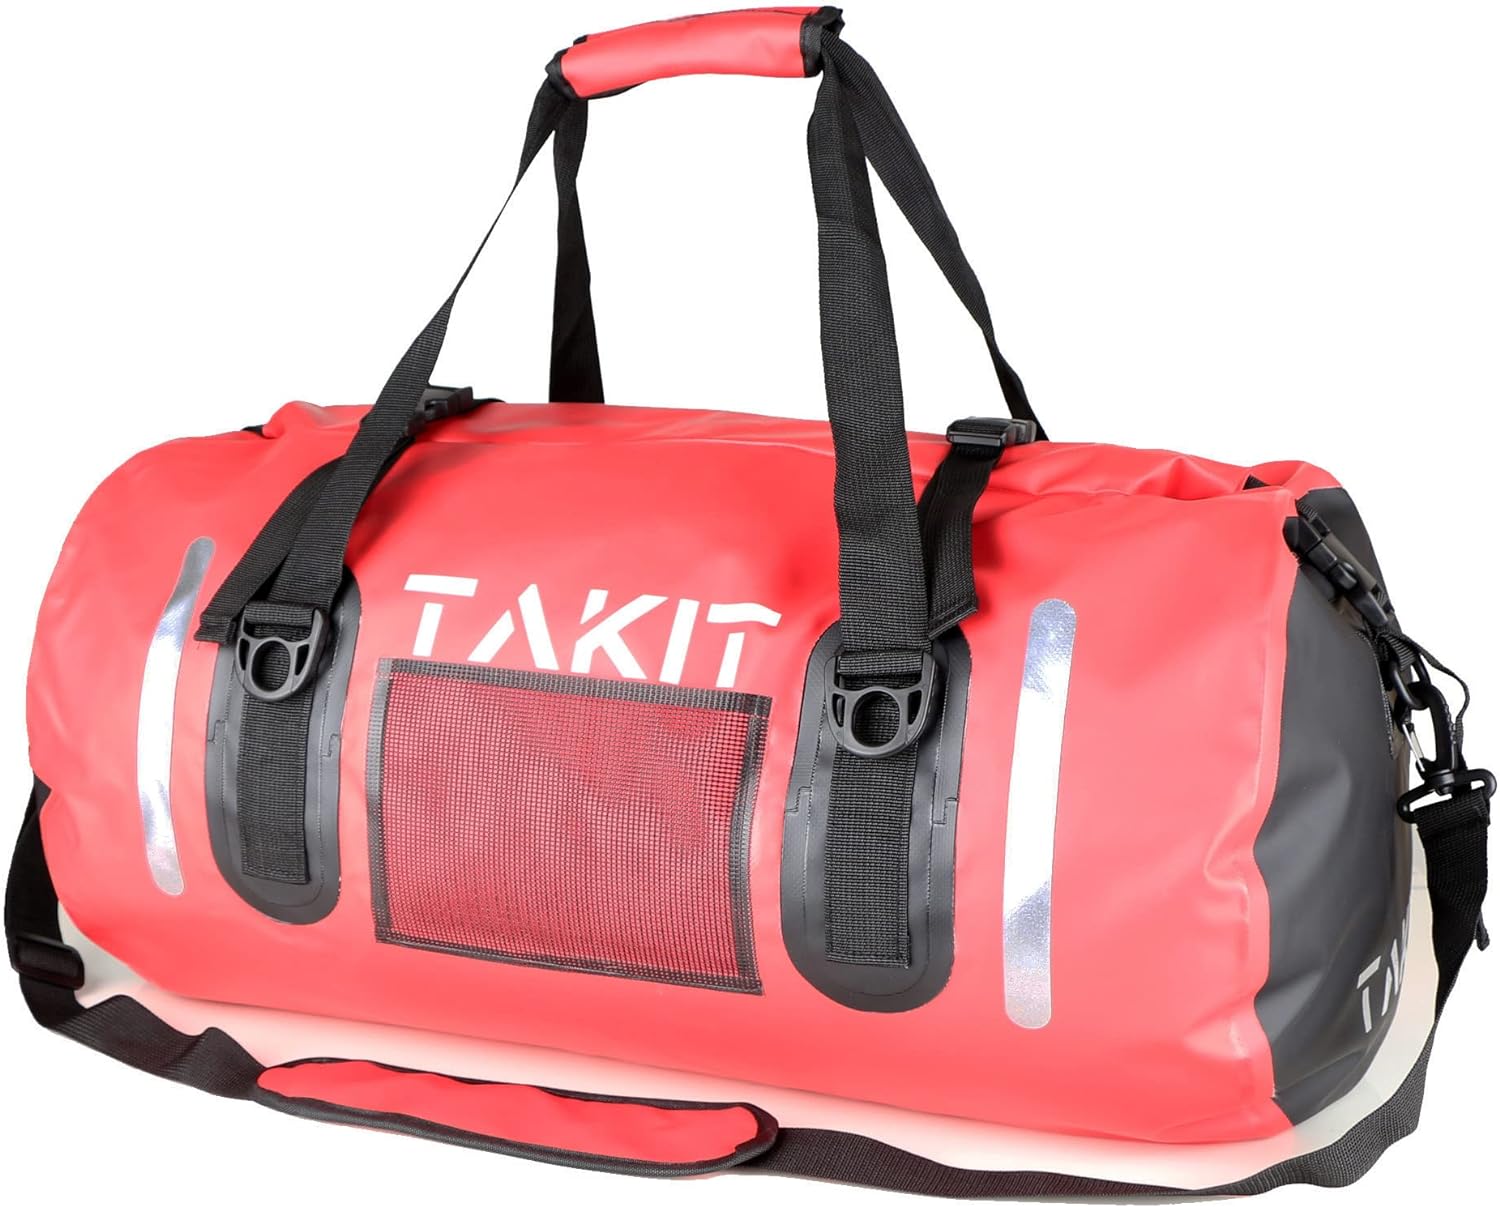 Waterproof Duffle Bag Travel Dry Bag 80L Roll Top 500D PVC for Motorcycle Tail Kayaking Rafting Boating Swimming Camping Hiking Beach Fishing(80L, Red)